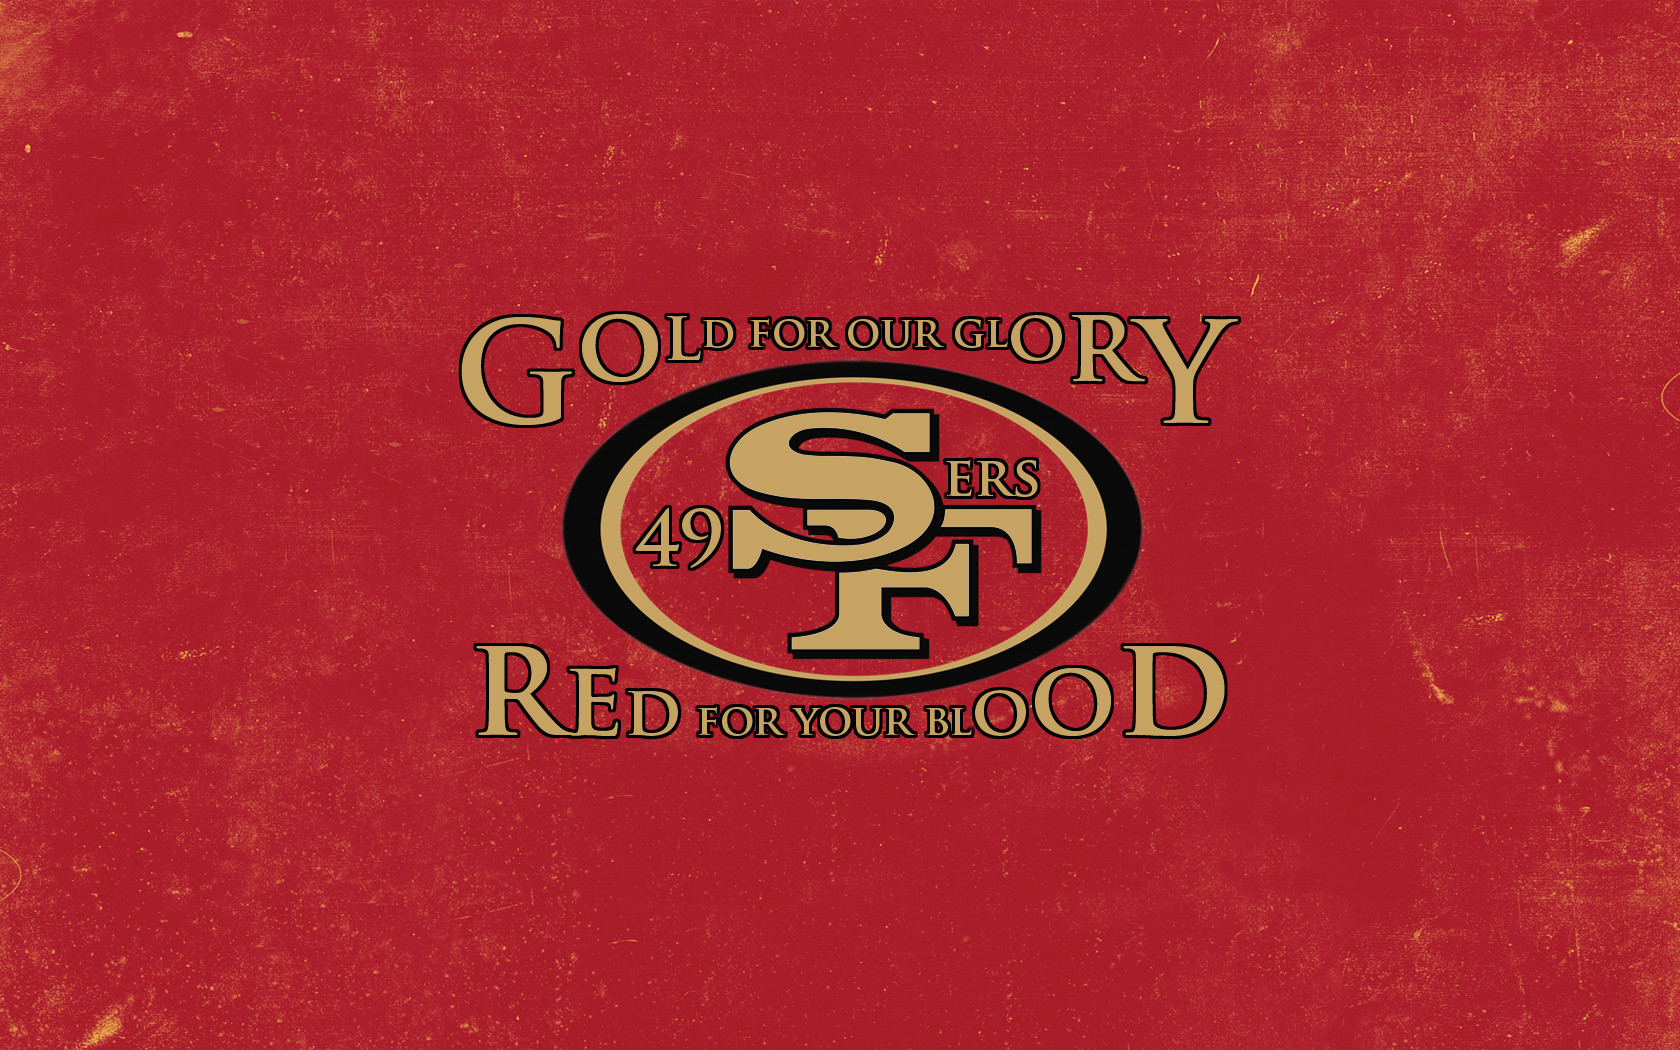 Free 49ers wallpaper for ipad